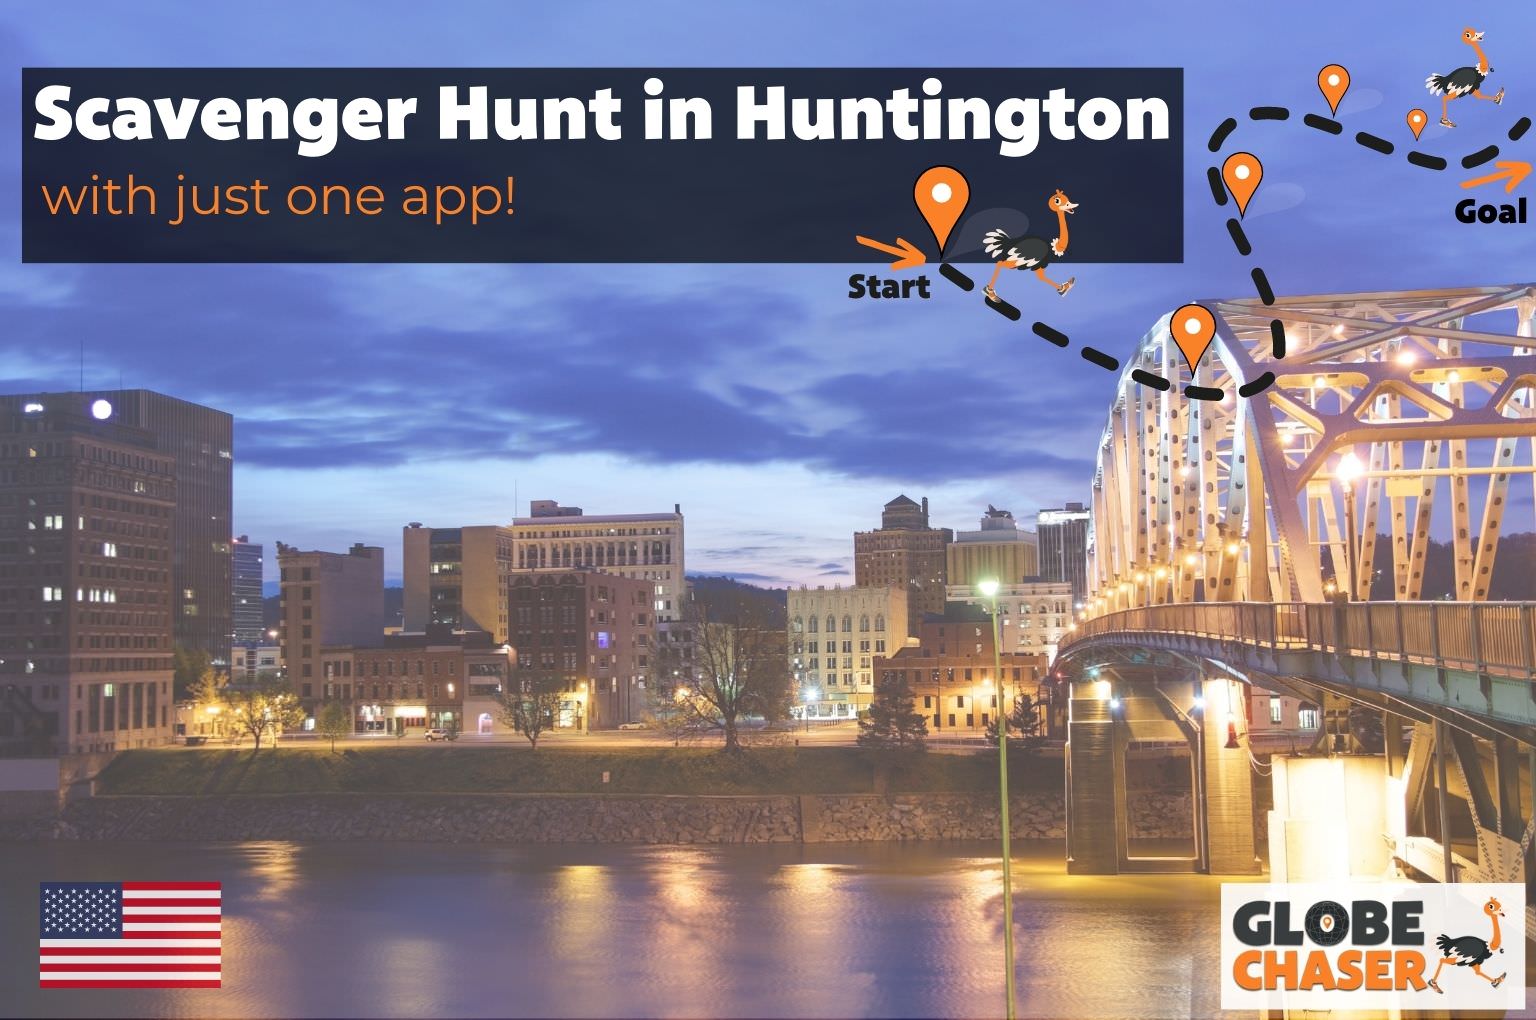 Scavenger Hunt in Huntington, USA - Family Activities with the Globe Chaser App for Outdoor Fun